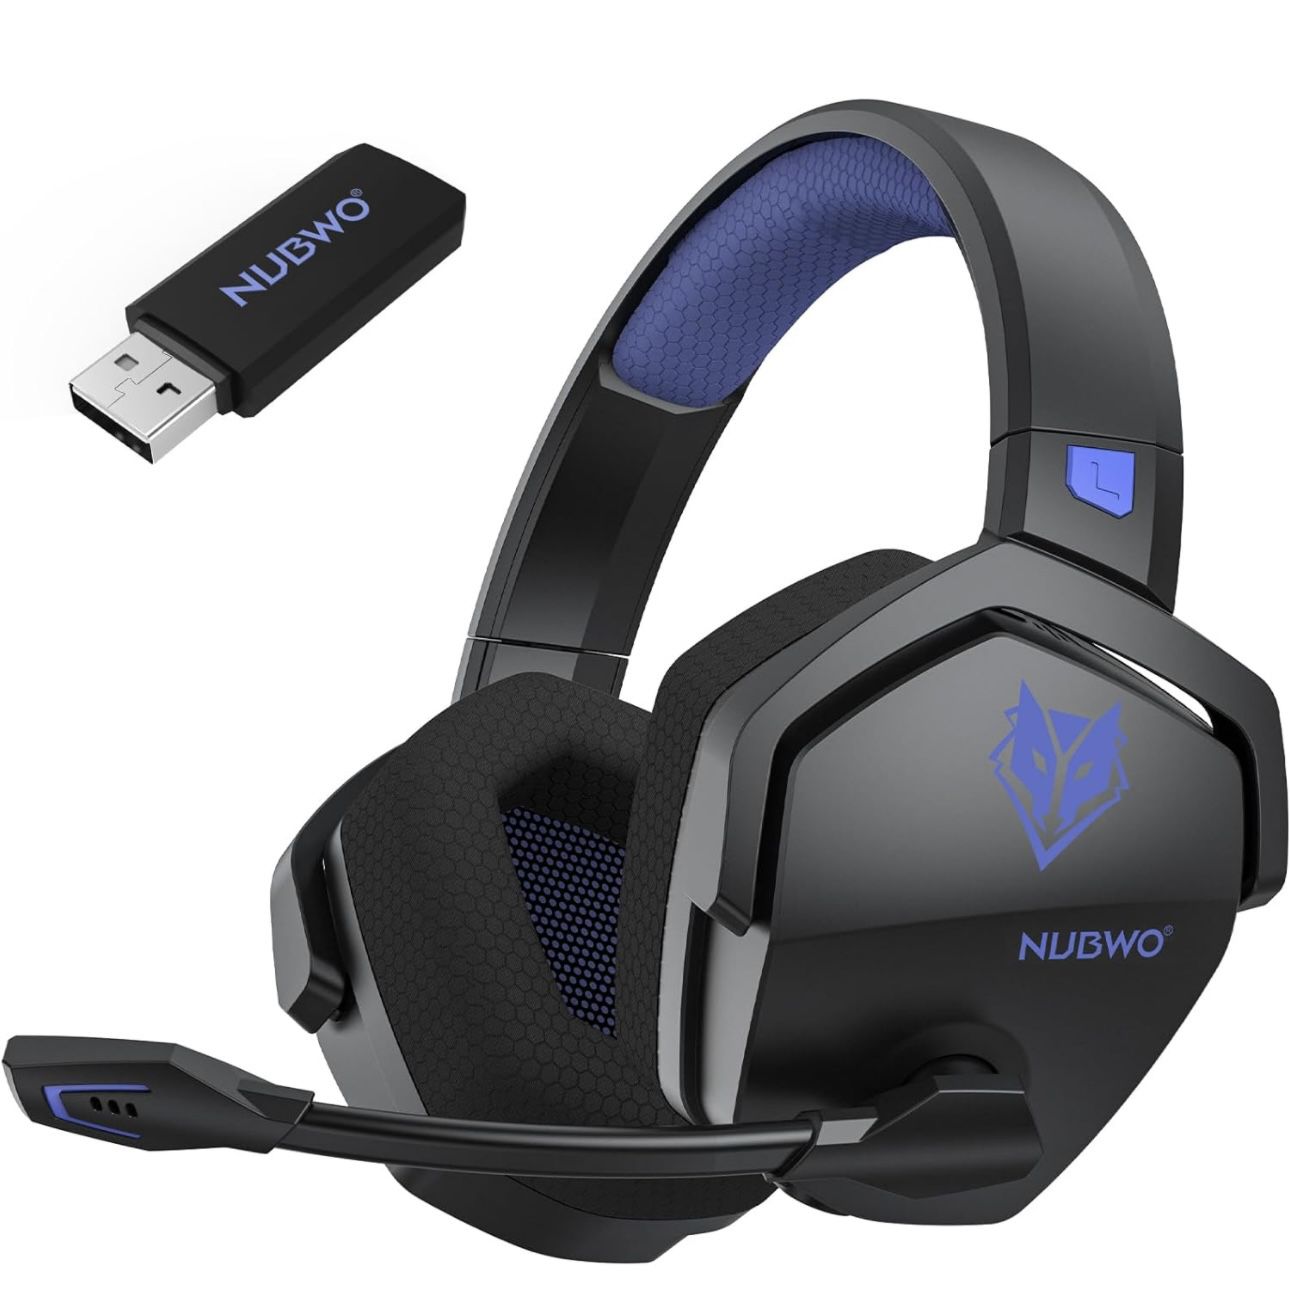 NUBWO G06 Dual Wireless Gaming Headset with Microphone for PS5, PS4, PC, Mobile, Switch: 2.4GHz Wireless + Bluetooth 